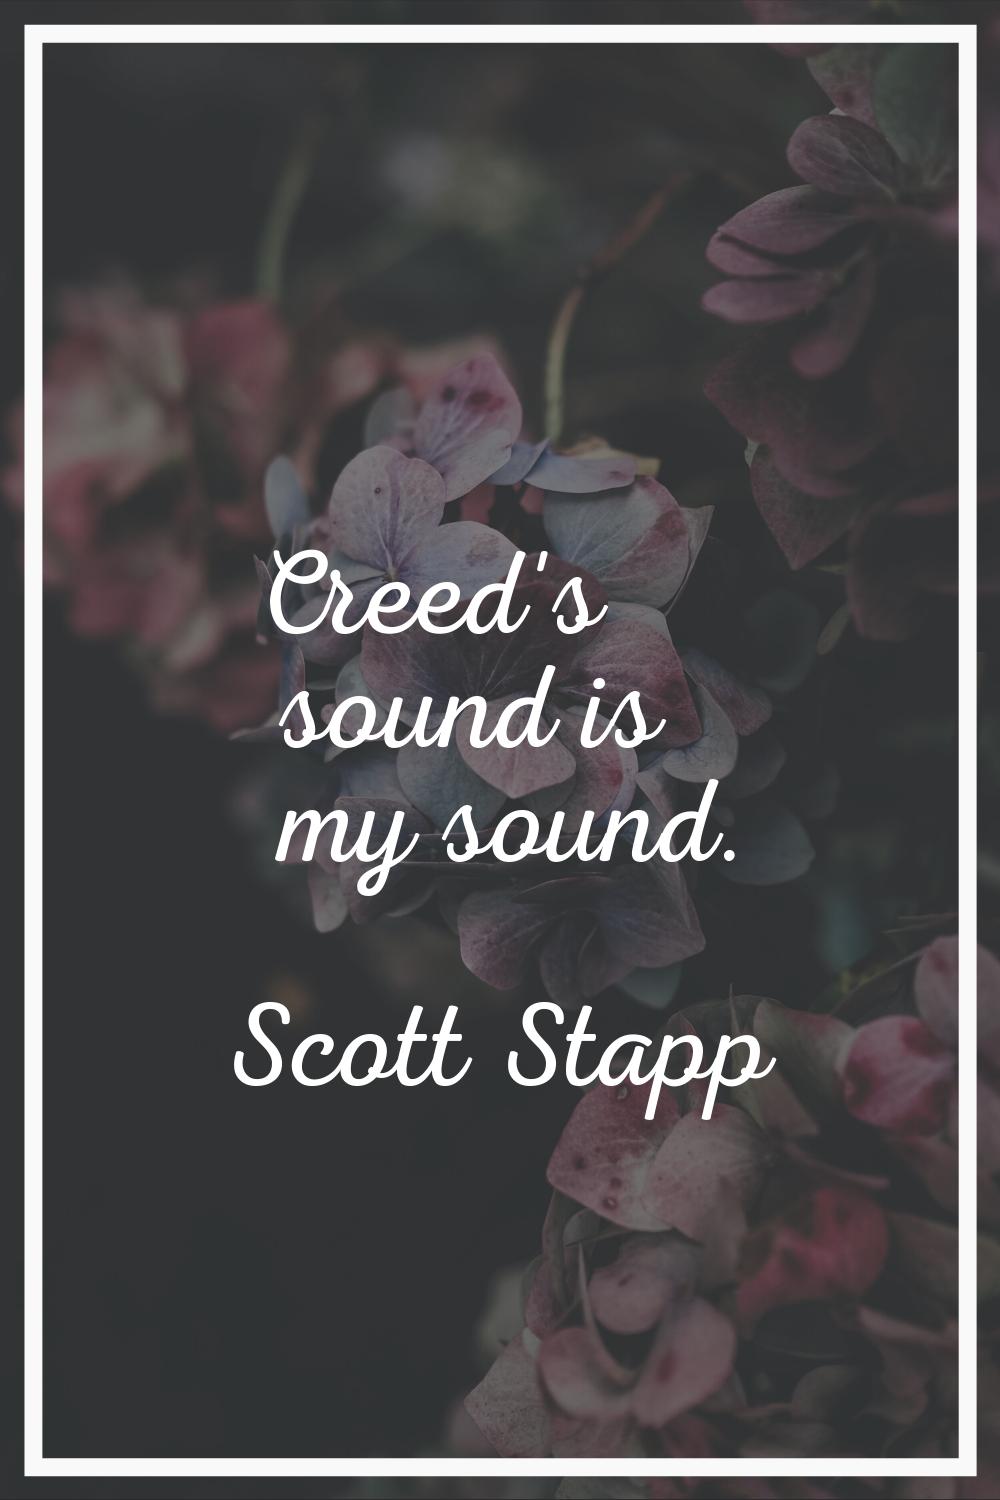 Creed's sound is my sound.